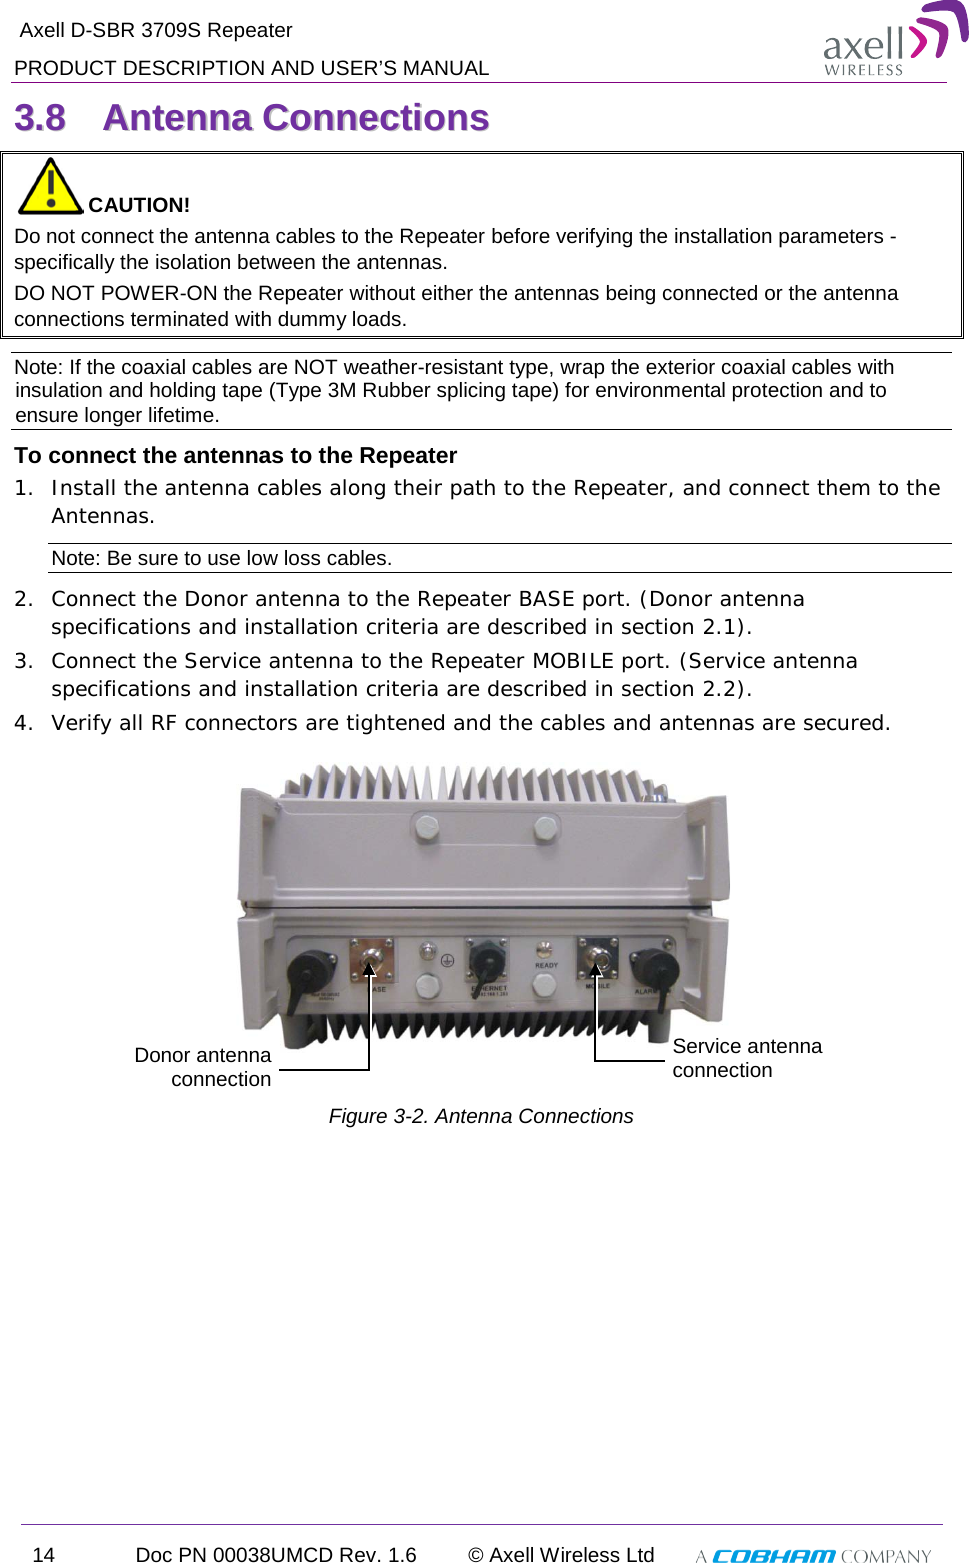  Axell D-SBR 3709S Repeater PRODUCT DESCRIPTION AND USER’S MANUAL 14 Doc PN 00038UMCD Rev. 1.6 © Axell Wireless Ltd   33..88  AAnntteennnnaa  CCoonnnneeccttiioonnss   CAUTION! Do not connect the antenna cables to the Repeater before verifying the installation parameters - specifically the isolation between the antennas. DO NOT POWER-ON the Repeater without either the antennas being connected or the antenna connections terminated with dummy loads.  Note: If the coaxial cables are NOT weather-resistant type, wrap the exterior coaxial cables with insulation and holding tape (Type 3M Rubber splicing tape) for environmental protection and to ensure longer lifetime. To connect the antennas to the Repeater 1.  Install the antenna cables along their path to the Repeater, and connect them to the Antennas. Note: Be sure to use low loss cables. 2.  Connect the Donor antenna to the Repeater BASE port. (Donor antenna specifications and installation criteria are described in section  2.1). 3.  Connect the Service antenna to the Repeater MOBILE port. (Service antenna specifications and installation criteria are described in section  2.2). 4.  Verify all RF connectors are tightened and the cables and antennas are secured.   Figure  3-2. Antenna Connections Donor antenna connection  Service antenna connection  